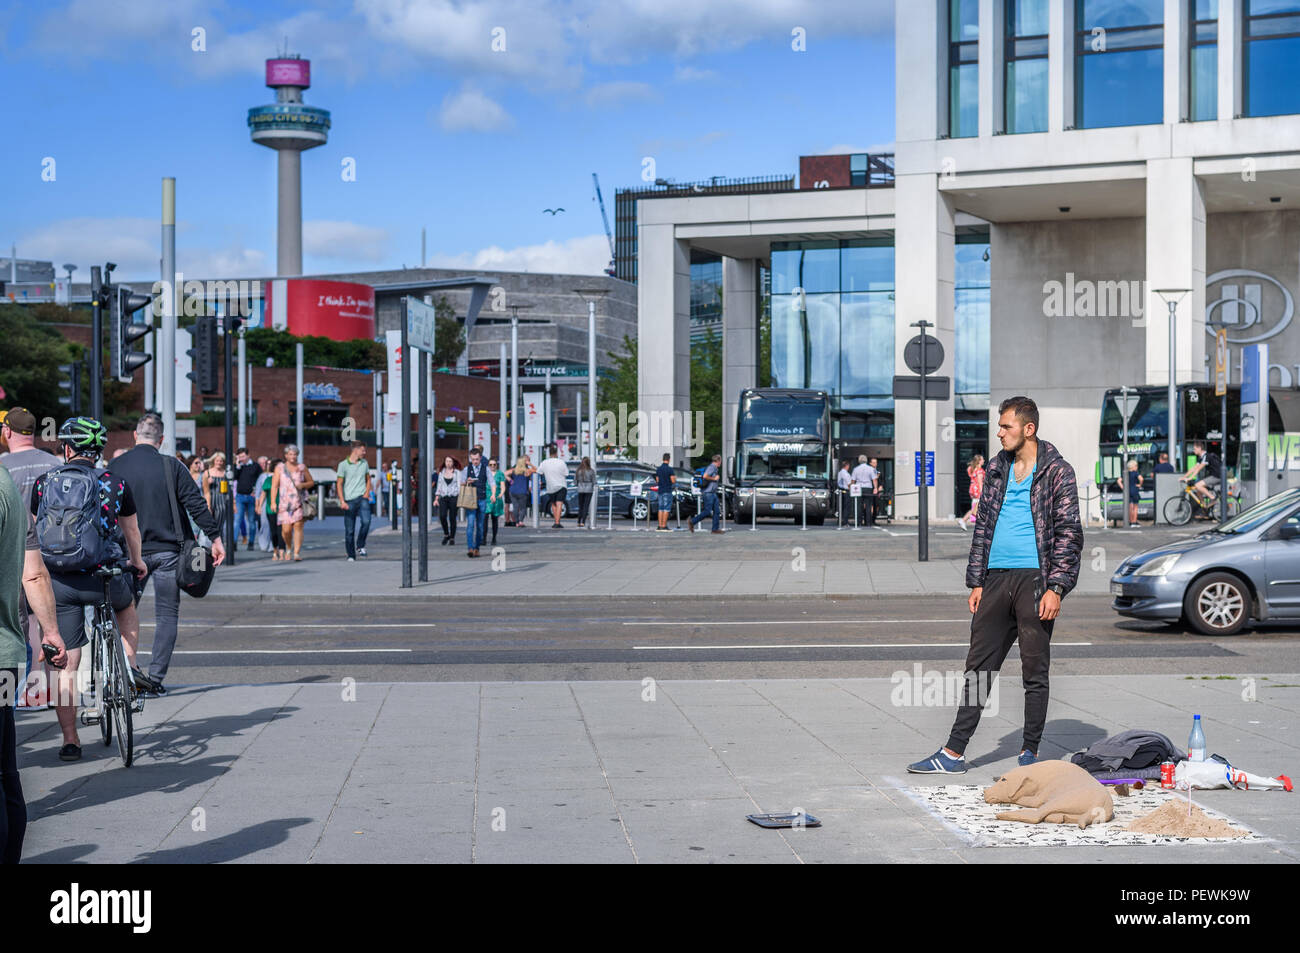 A street artist with sand sculpture of a dog in Liverpool city centre as pedestrians cross the road. Stock Photo